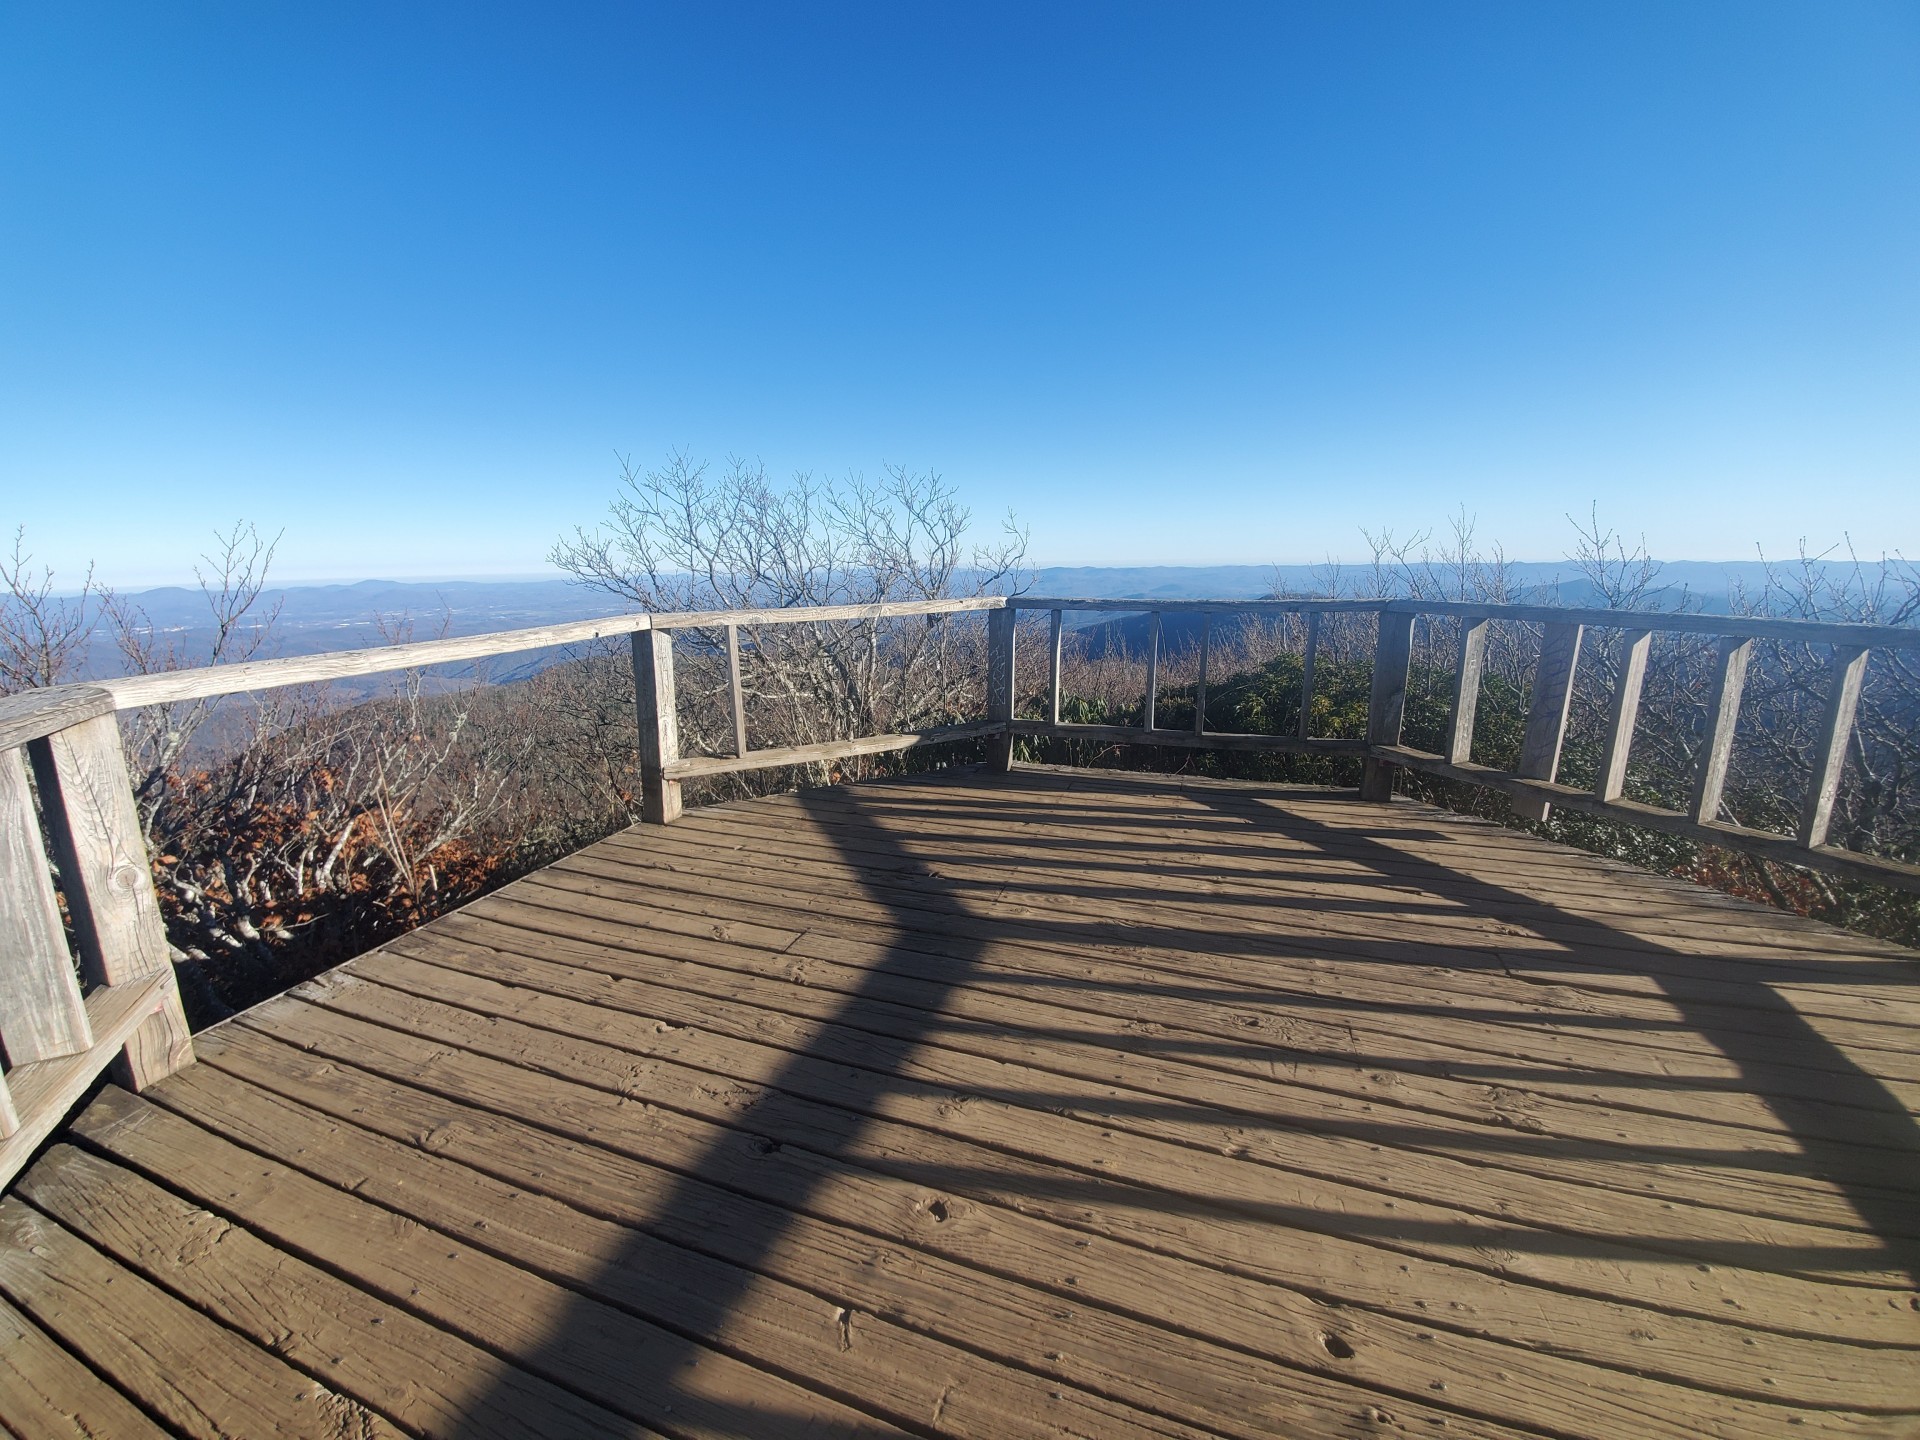 The wide deck of the platform on the Mount Pisgah Trail with a view of the mountains in the distance